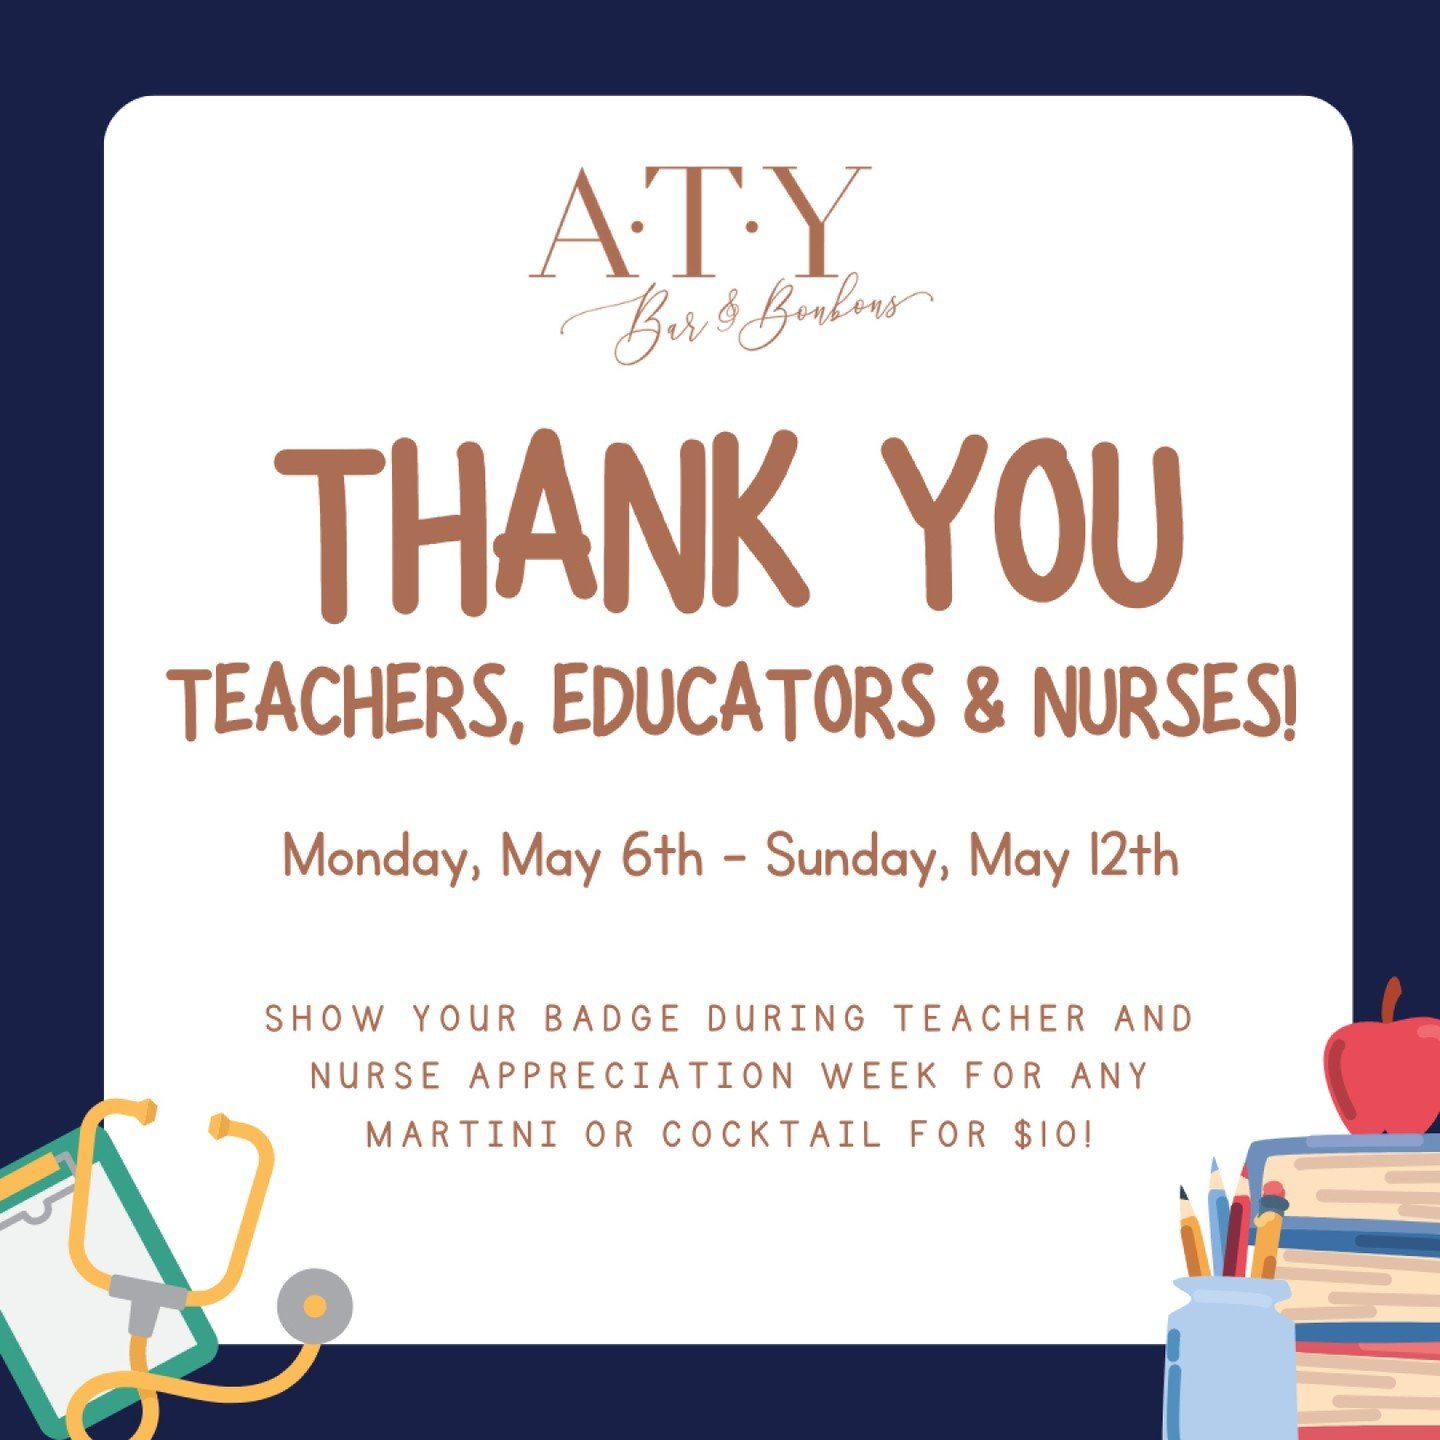 Teachers, educators and nurses! Join us for Teacher and Nurse Appreciation Week, Monday May 6th - Sunday, May 12th and show your badge for any martini or cocktail for $10!

We're open daily from 5 - 10 p.m.! We can't wait to see you! 🍎 👩&zwj;⚕️ 

*